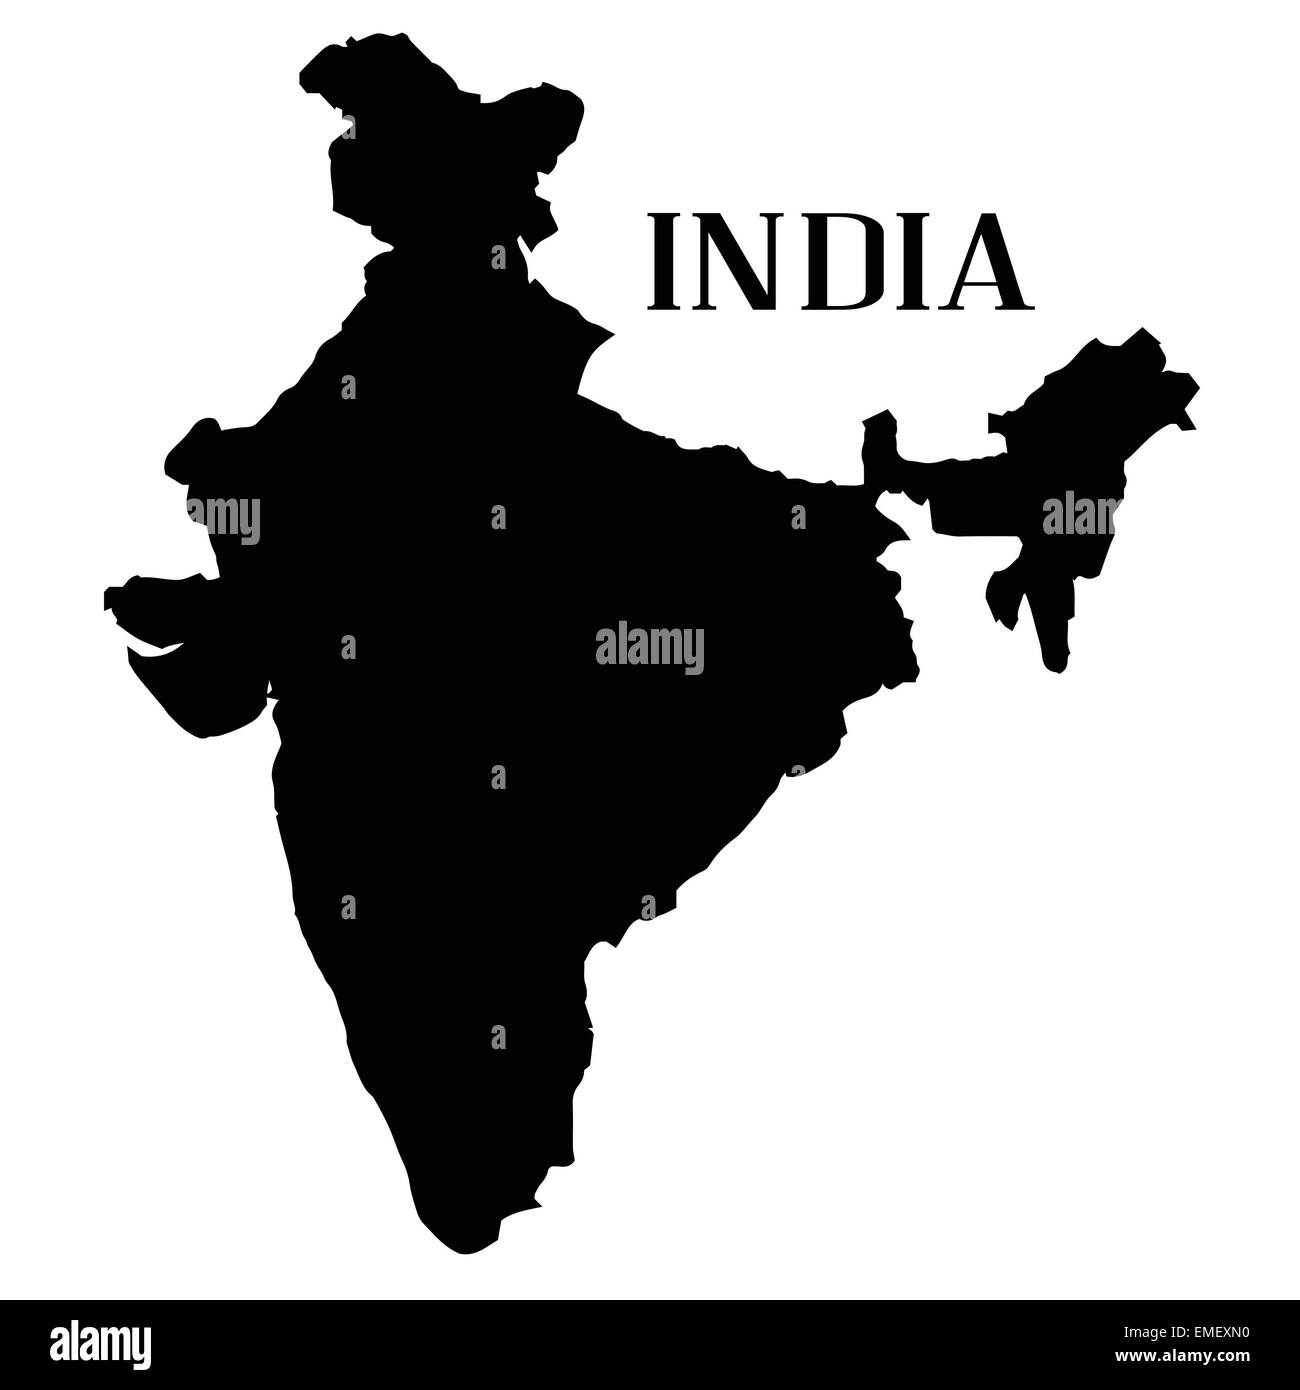 India Map Silhouette Stock Vector